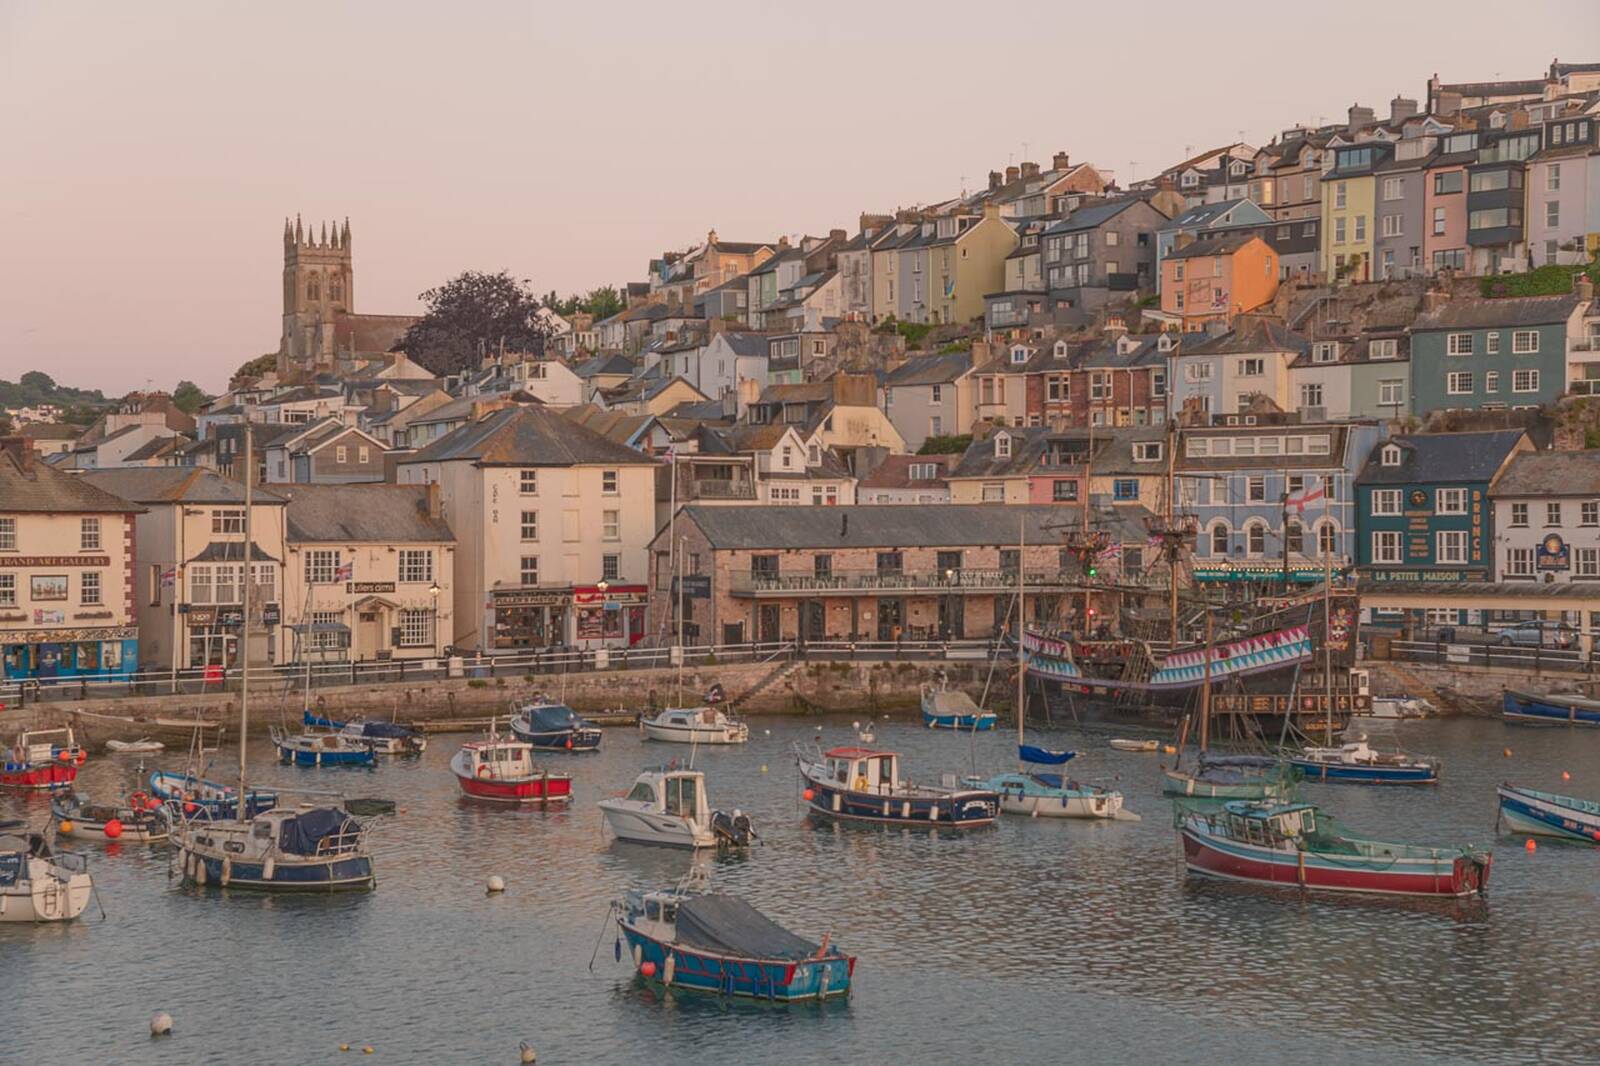 Image of Brixham Harbour by michael bennett